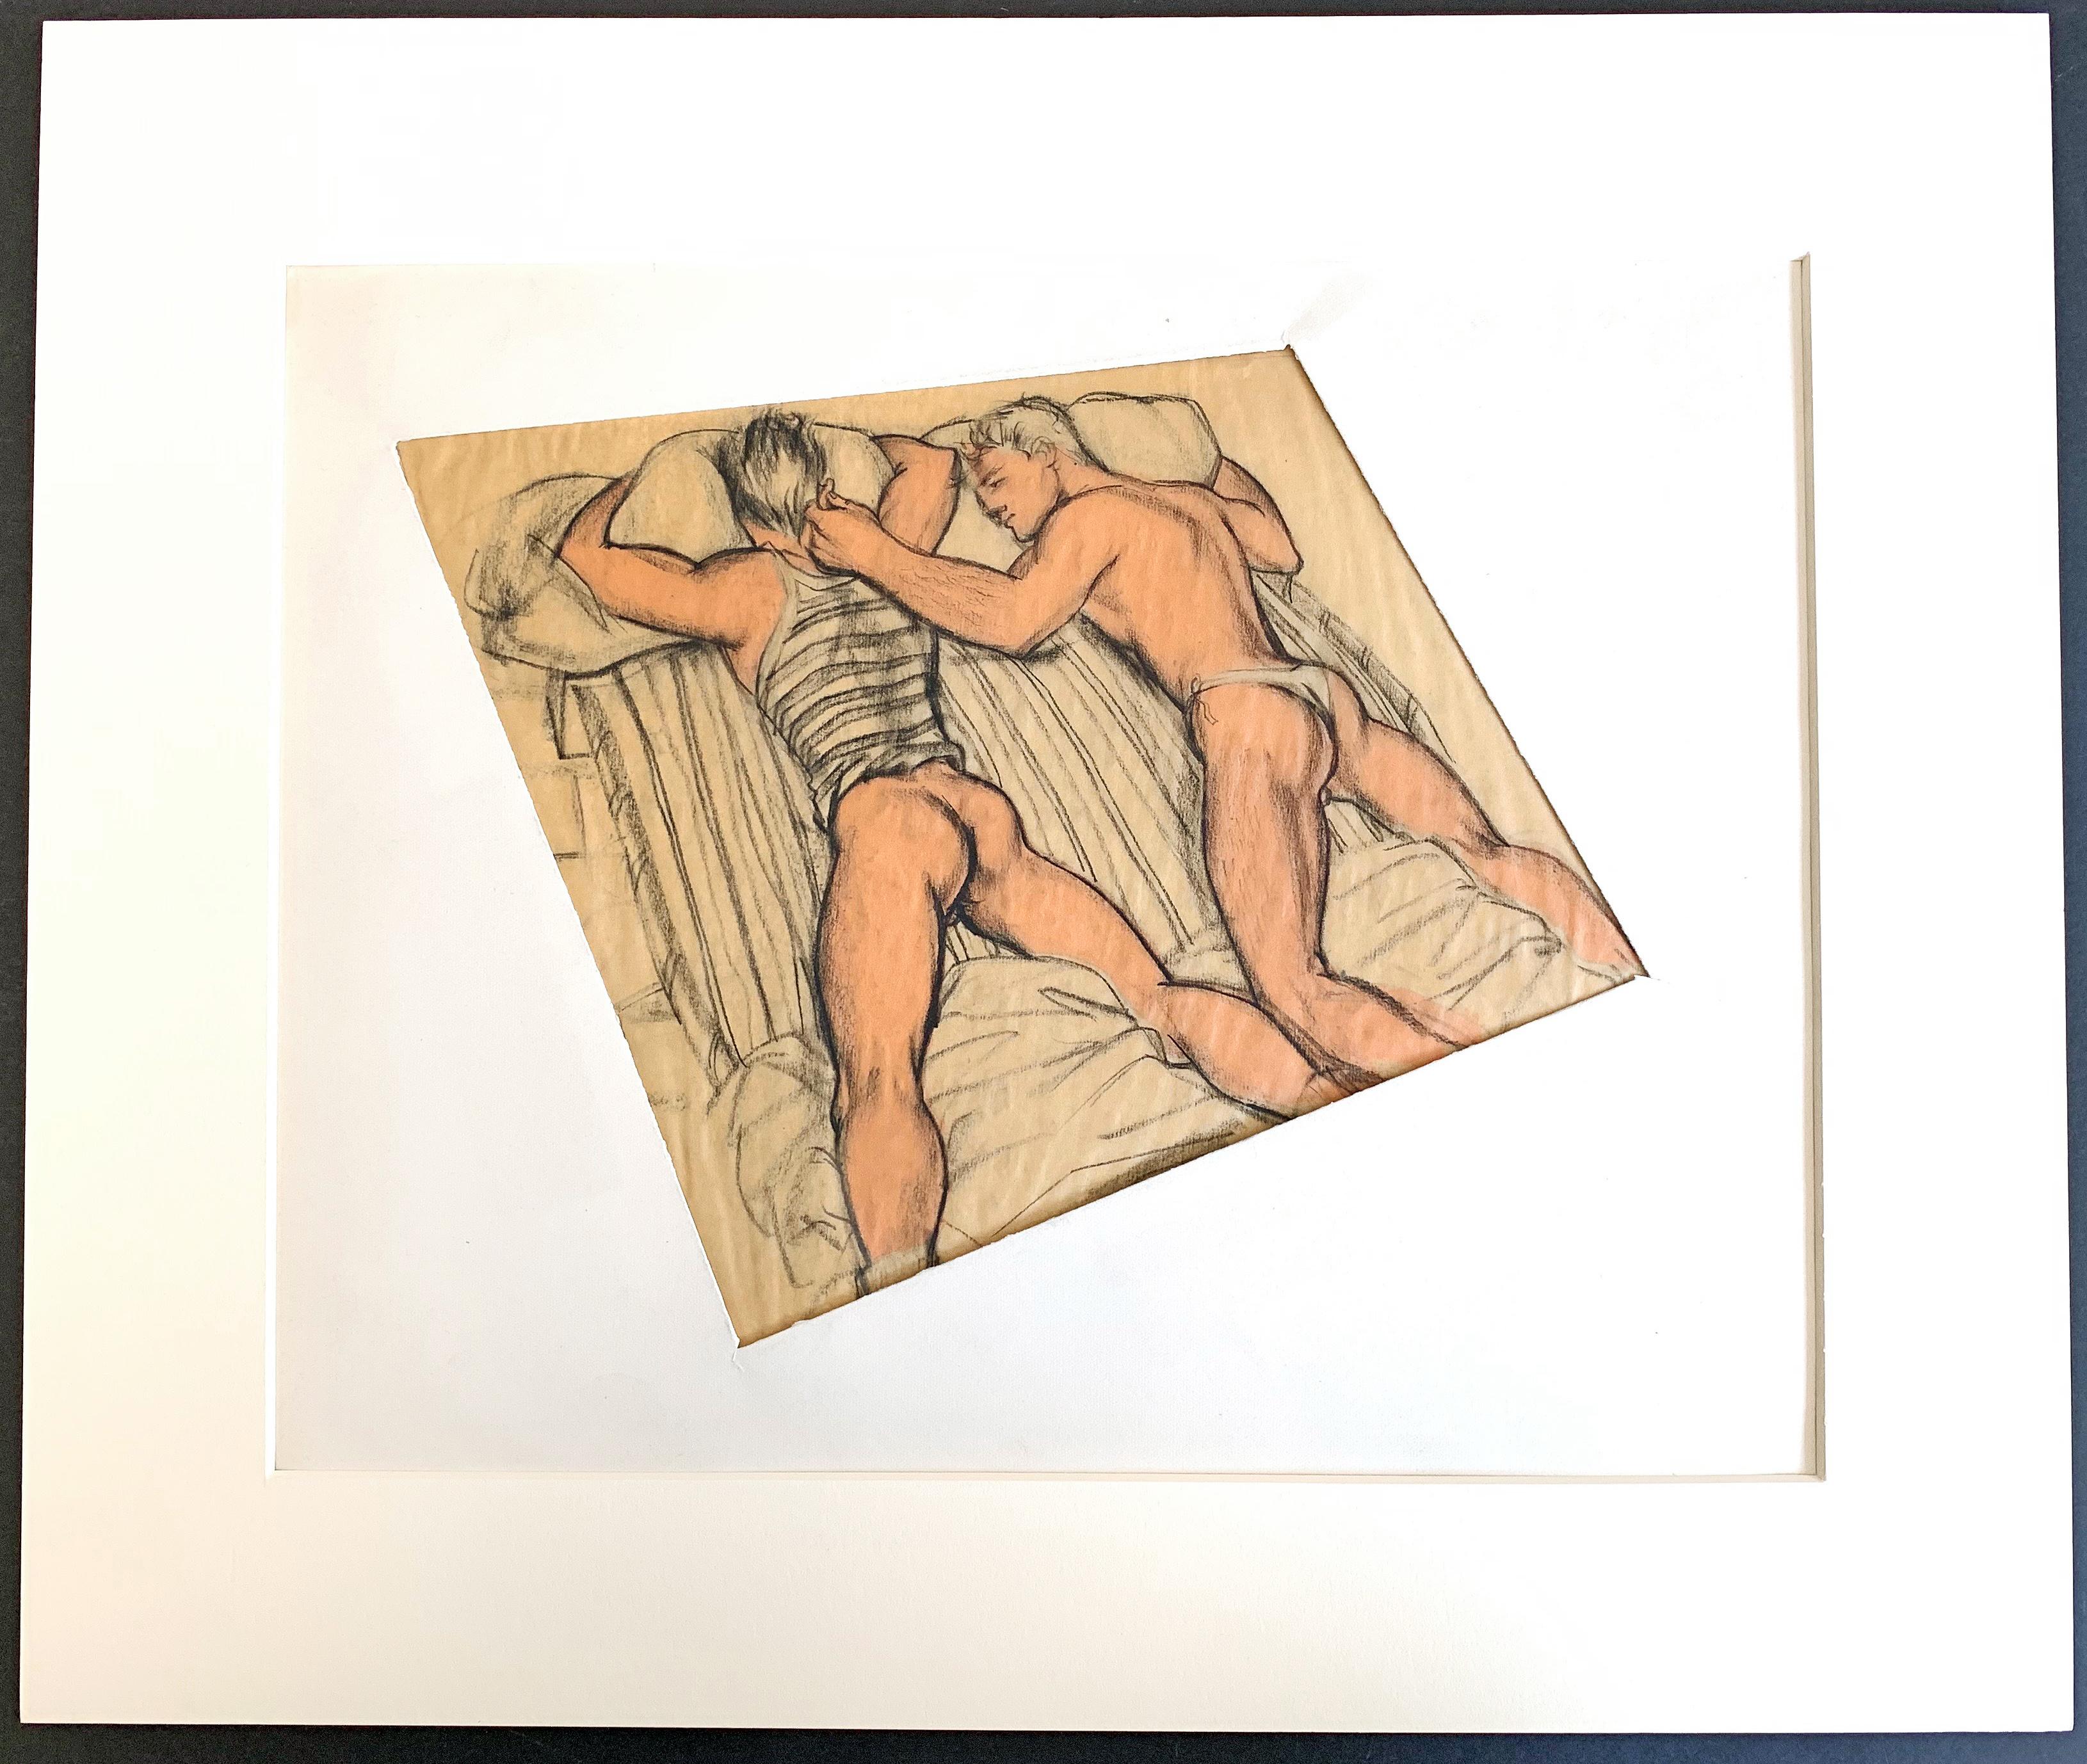 This rare depiction of a gay male couple in a quiet moment of bedroom intimacy, dating from the 1950s, was drawn by Avel de Knight, an important Black artist and teacher. Born in New York, this piece probably dates from his years in Europe as a